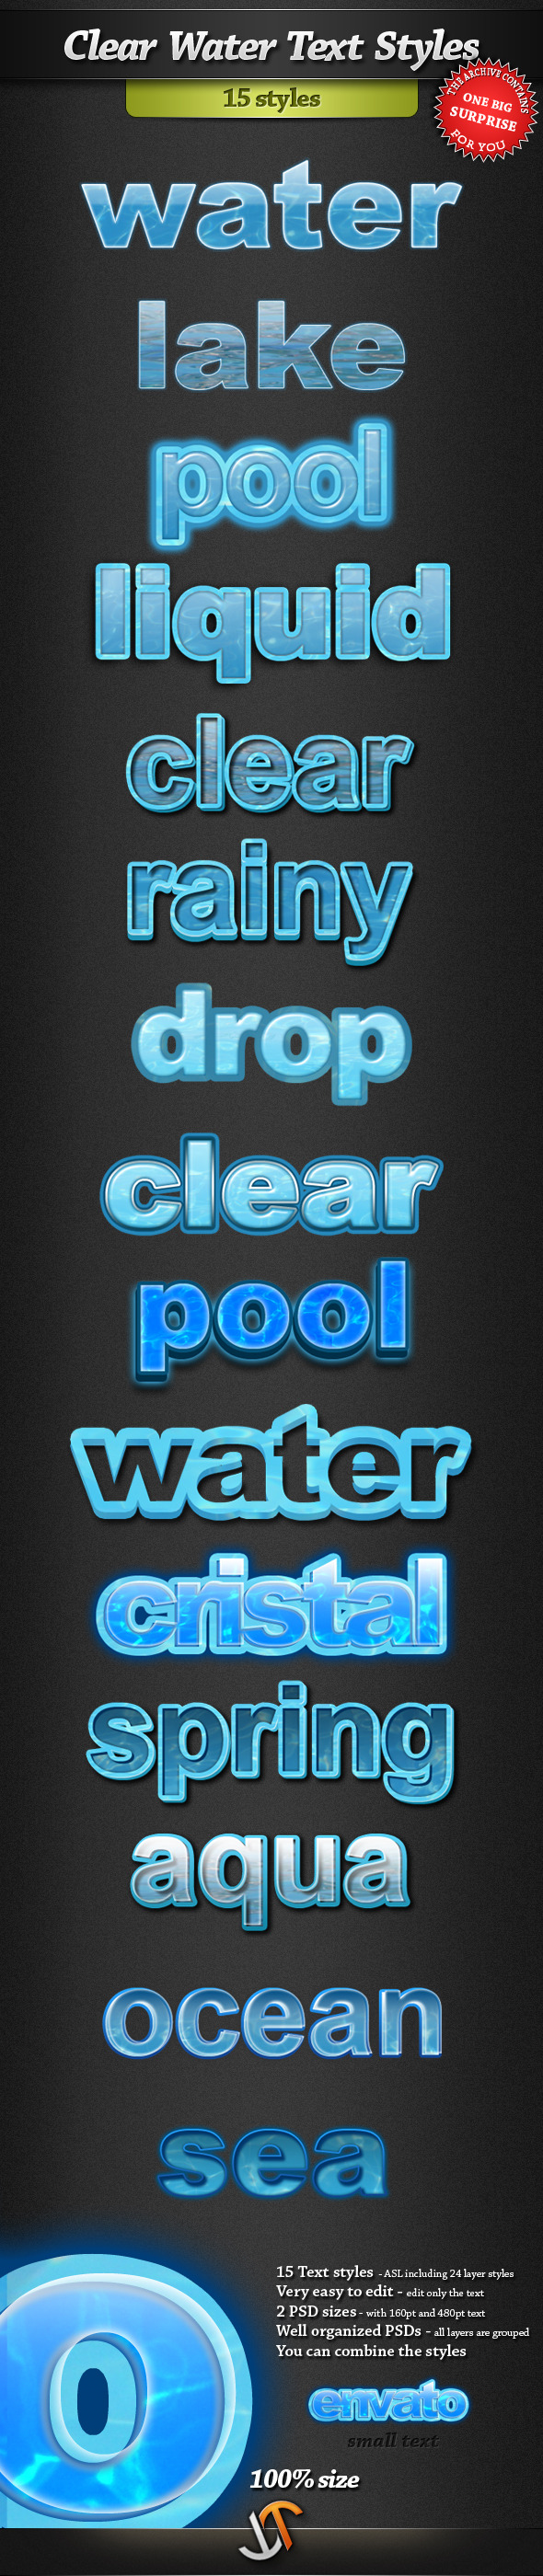 Clear Water Text Styles